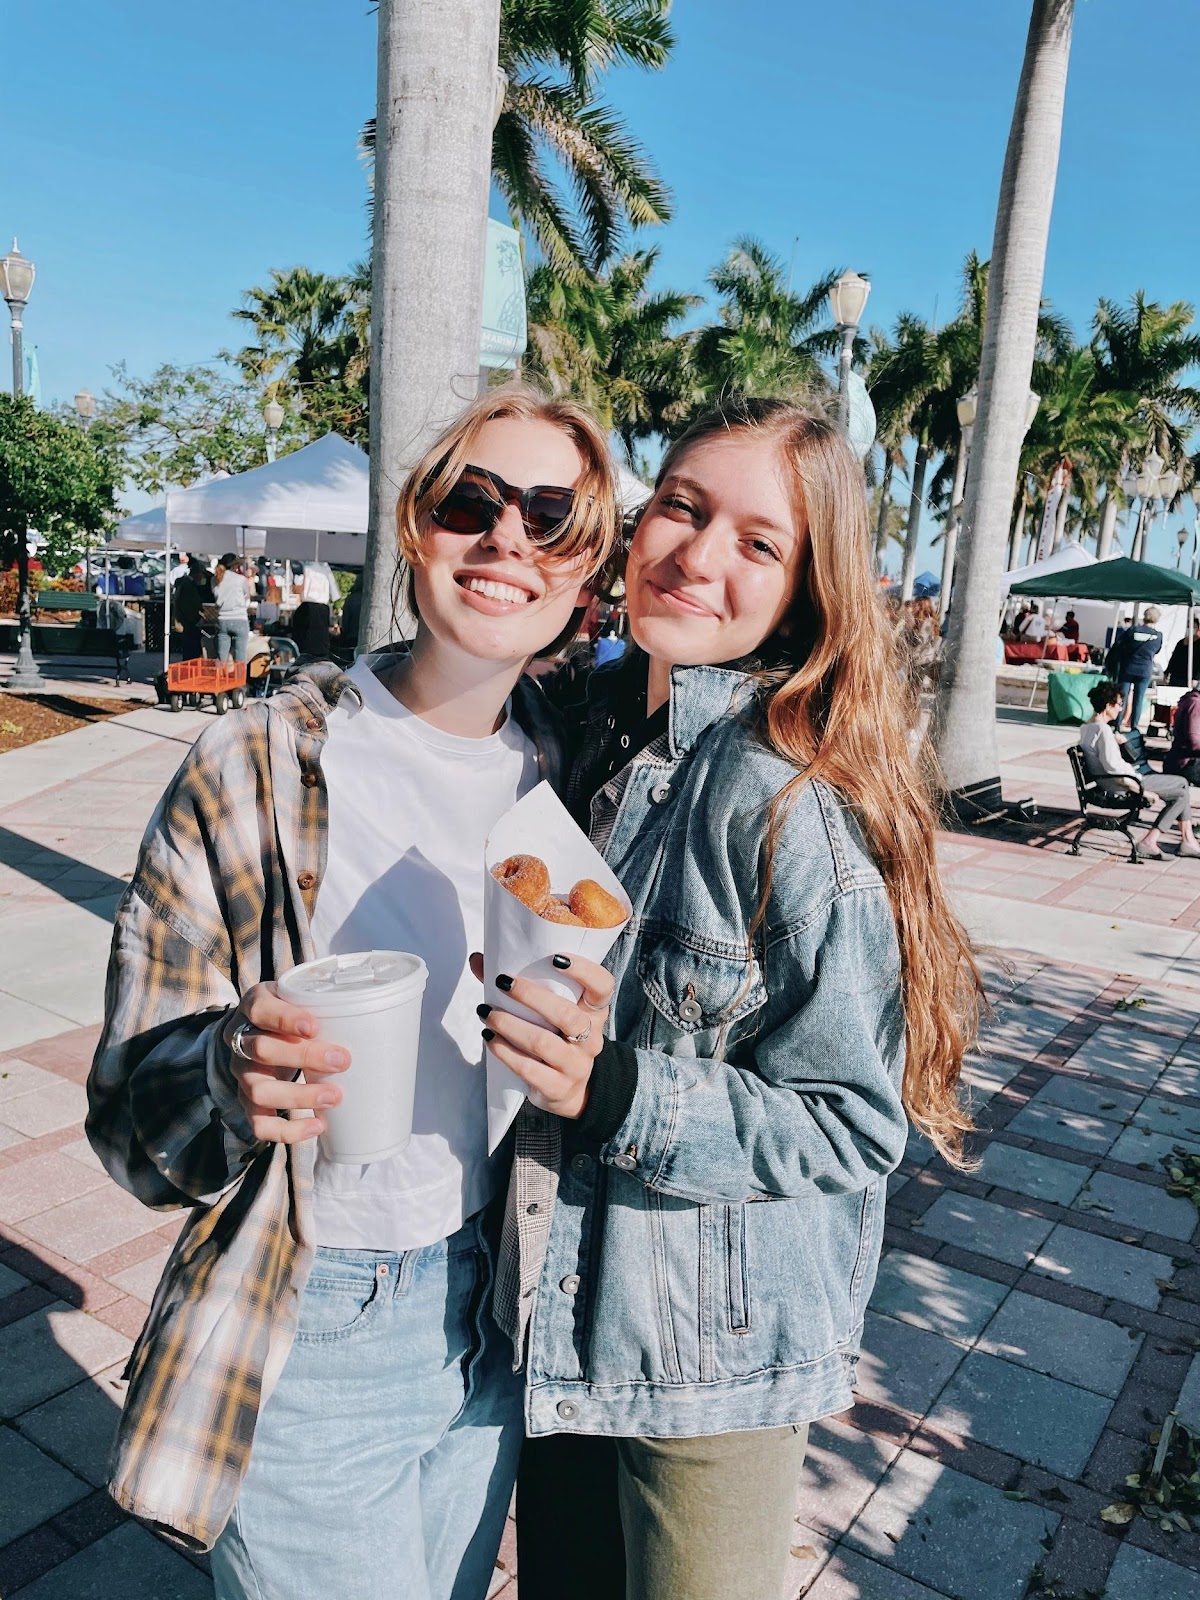 Ellie and Nina smiling from a beach with some street food